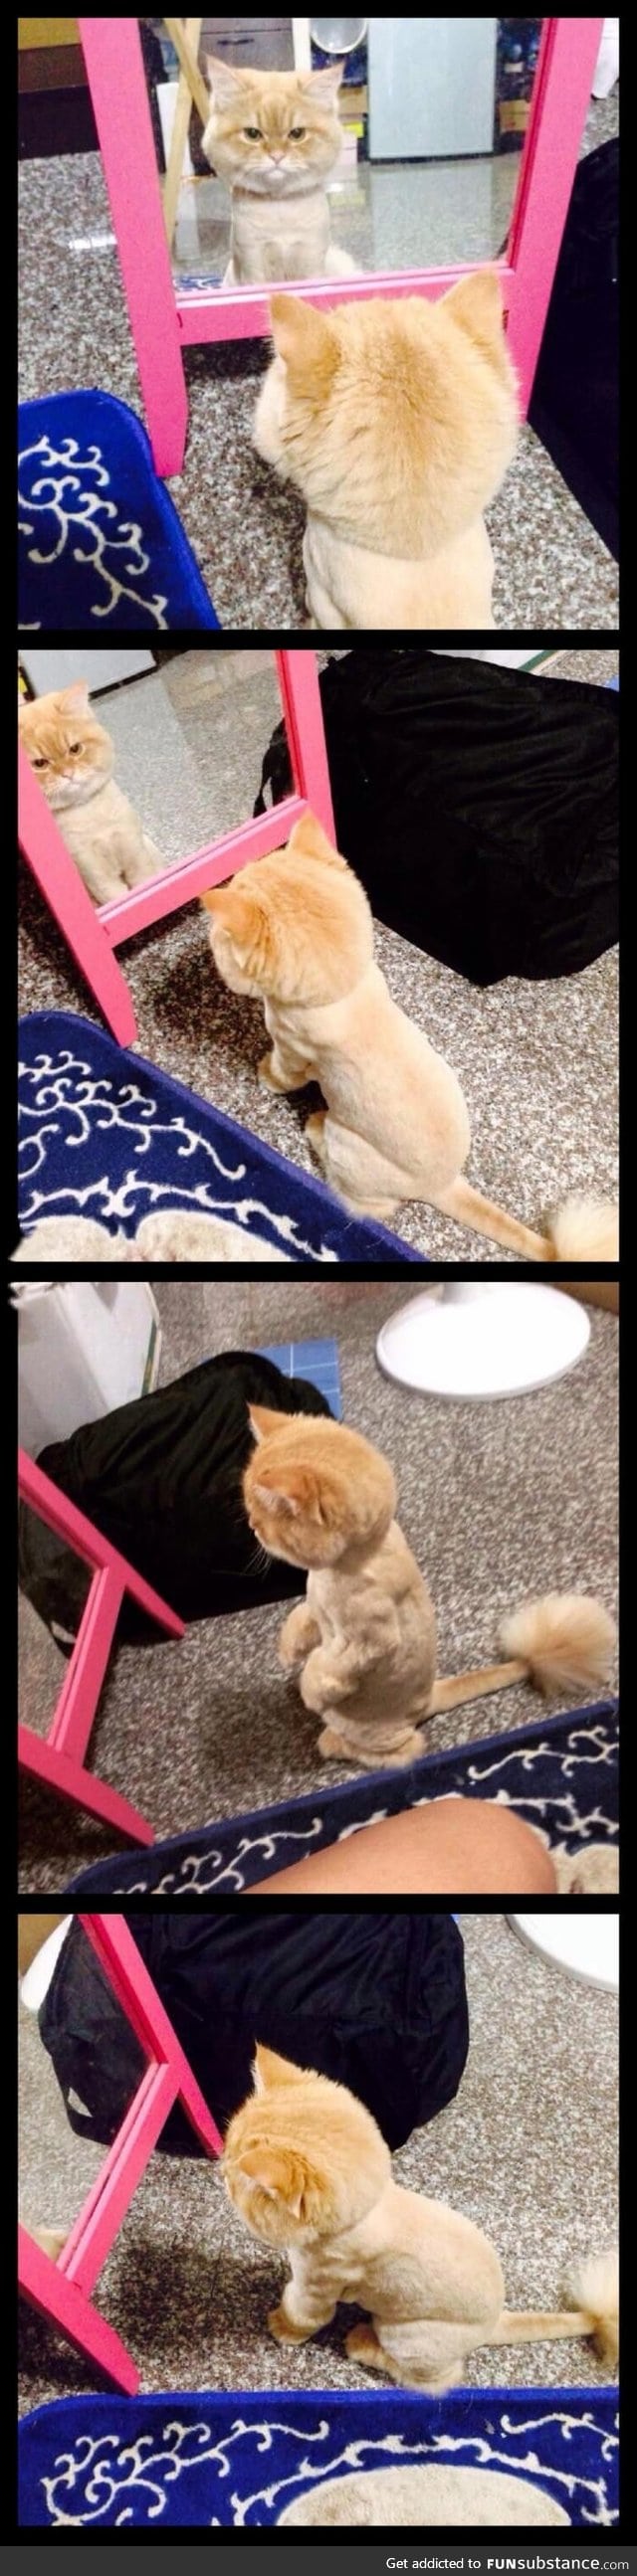 This cat stood for hours in front of the mirror after getting shaved